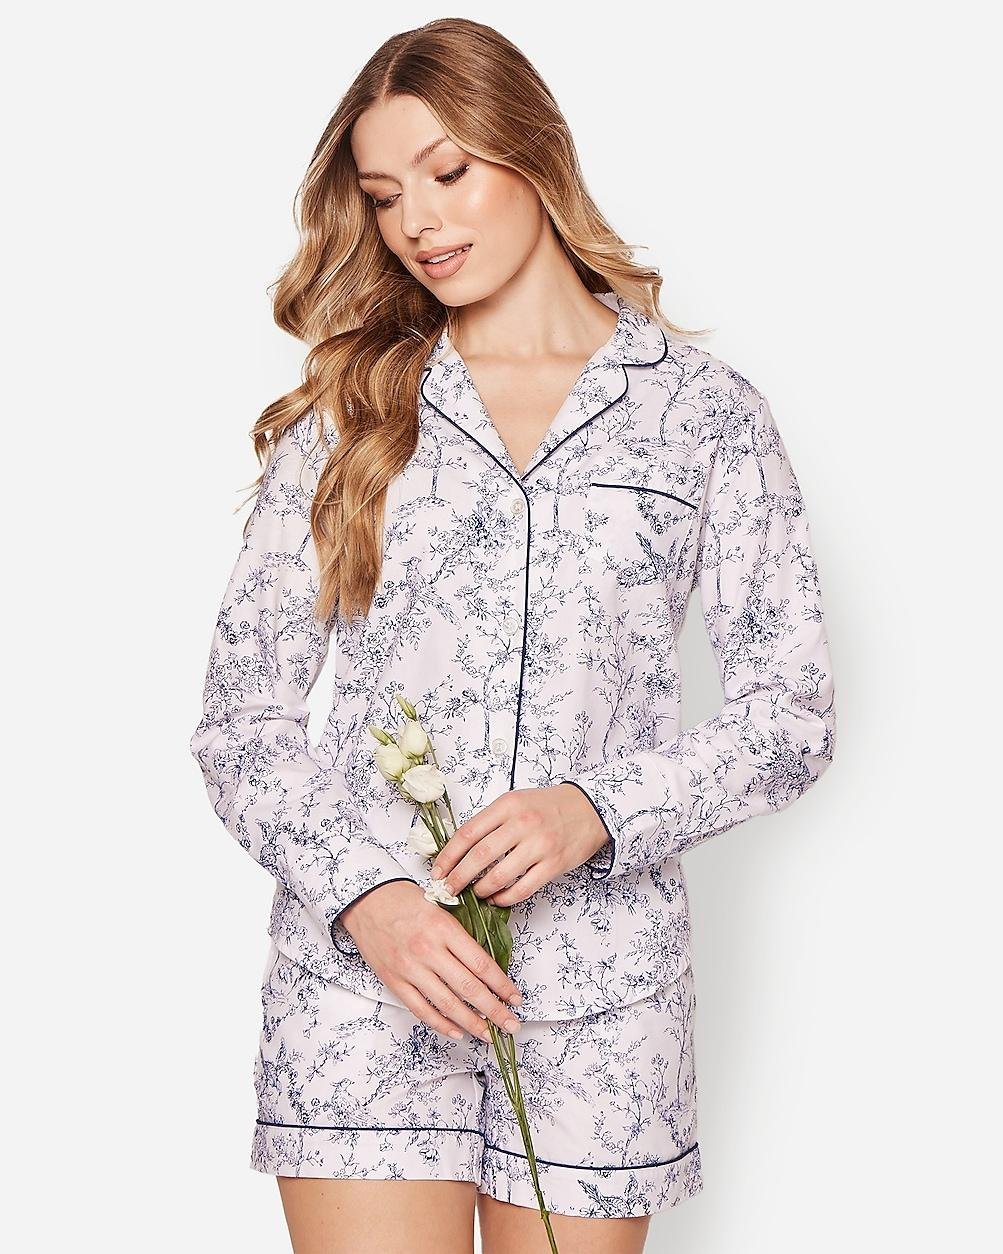 Petite Plume™ women's pajama set in timeless toile by J.CREW